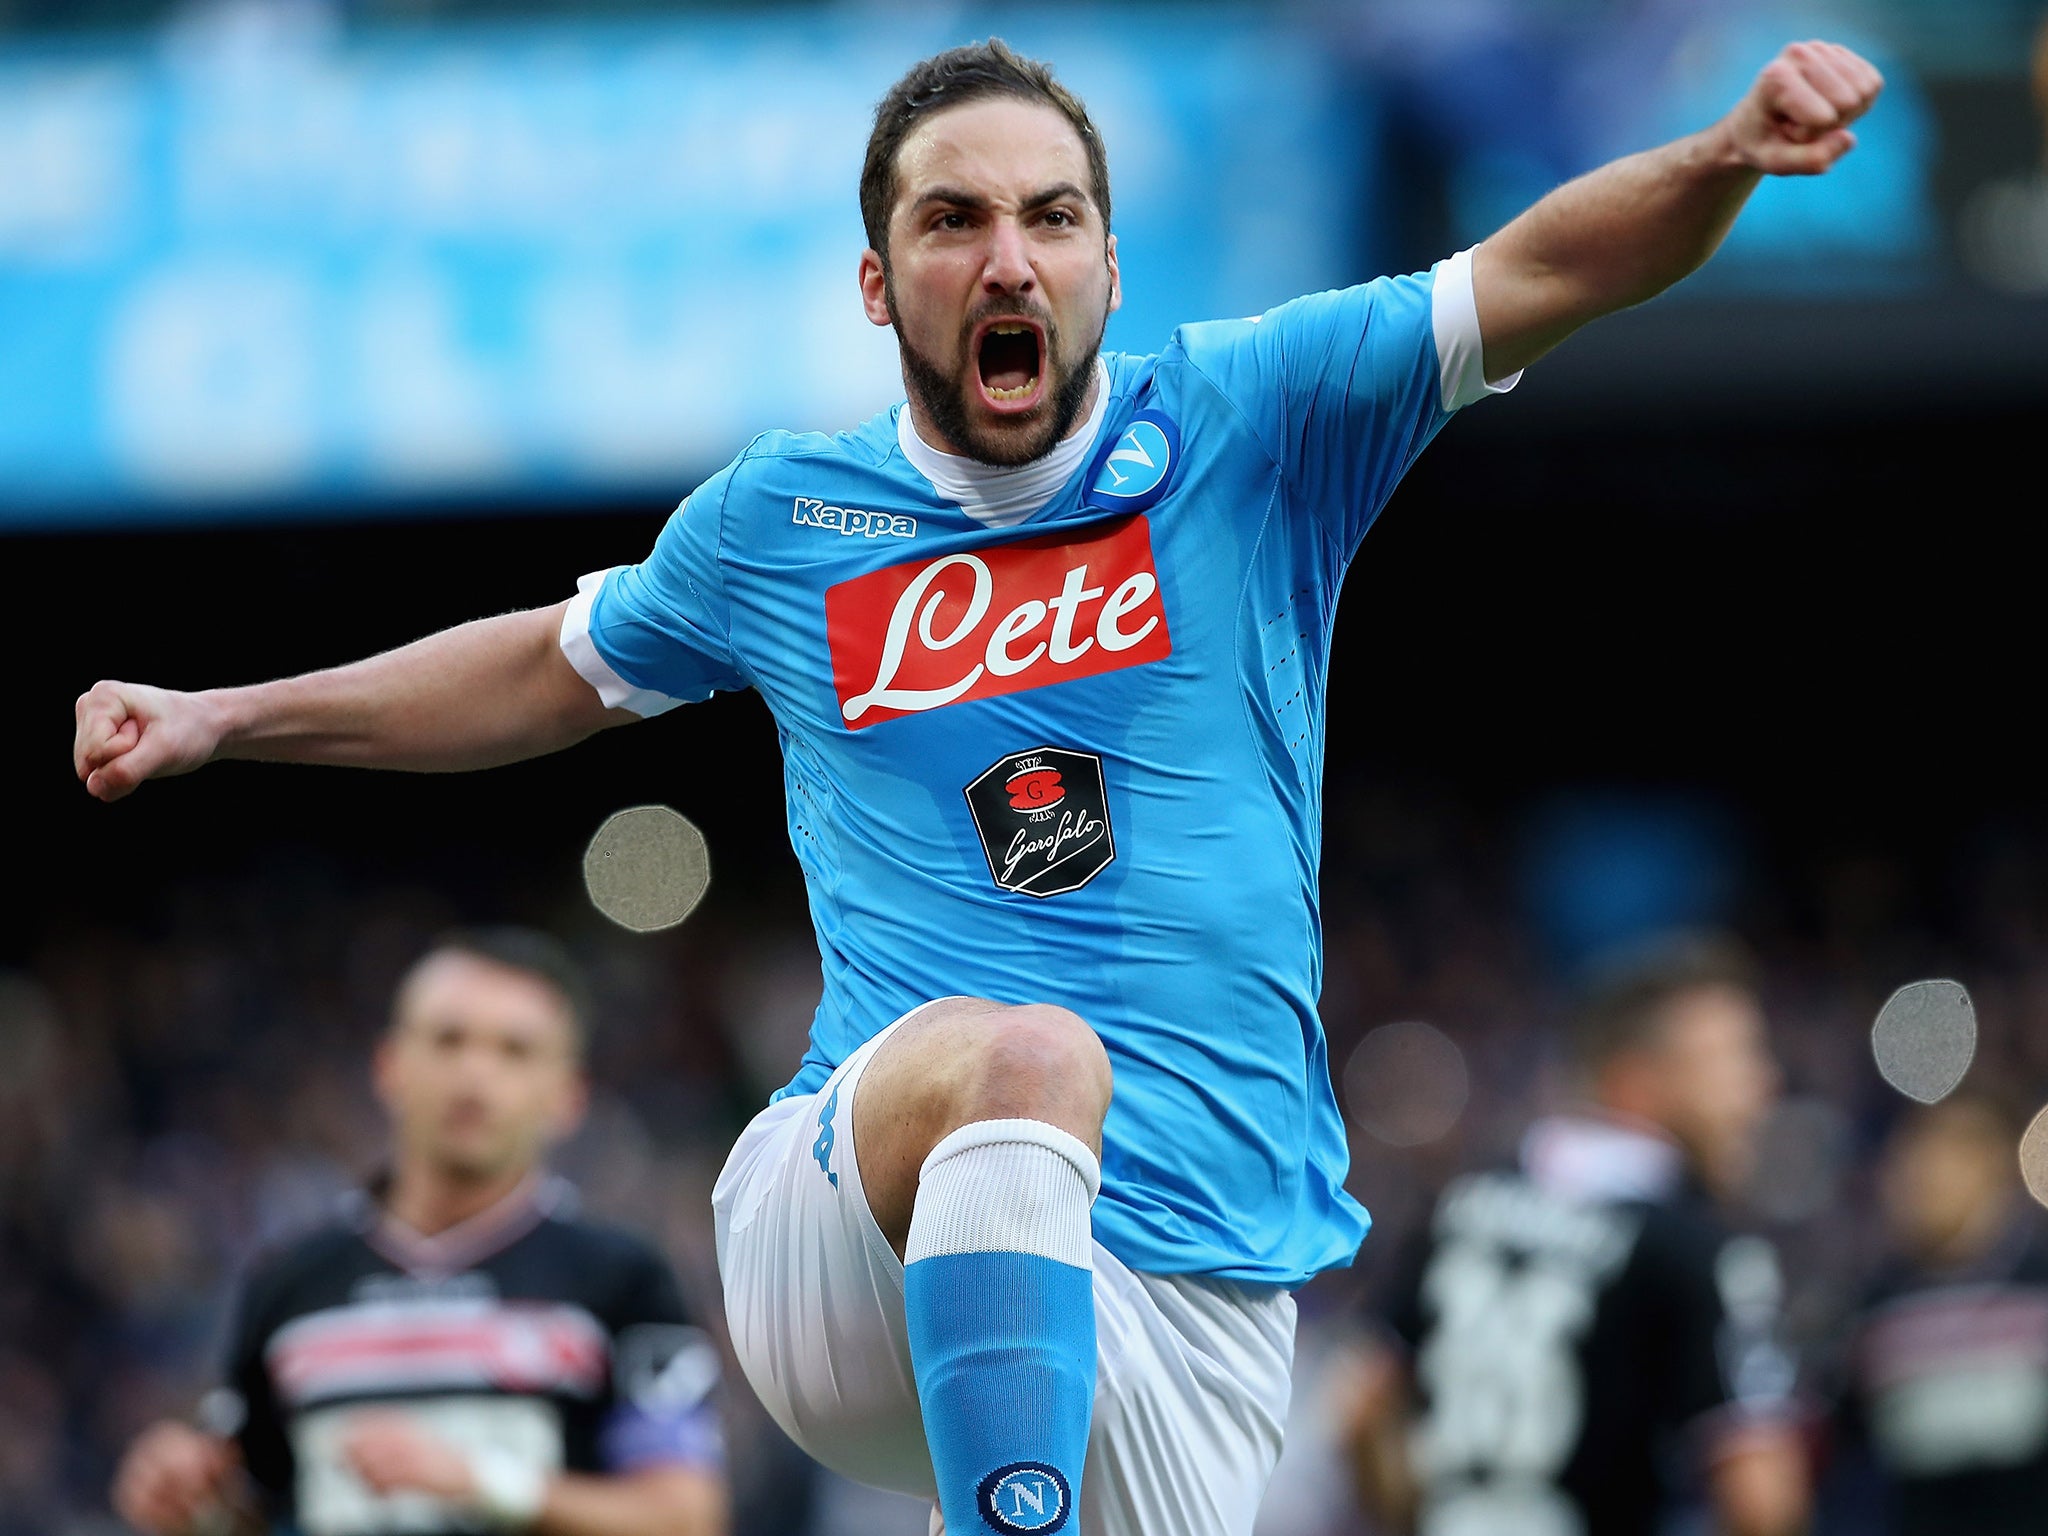 Higuain is believed to be looking for a way out of Napoli